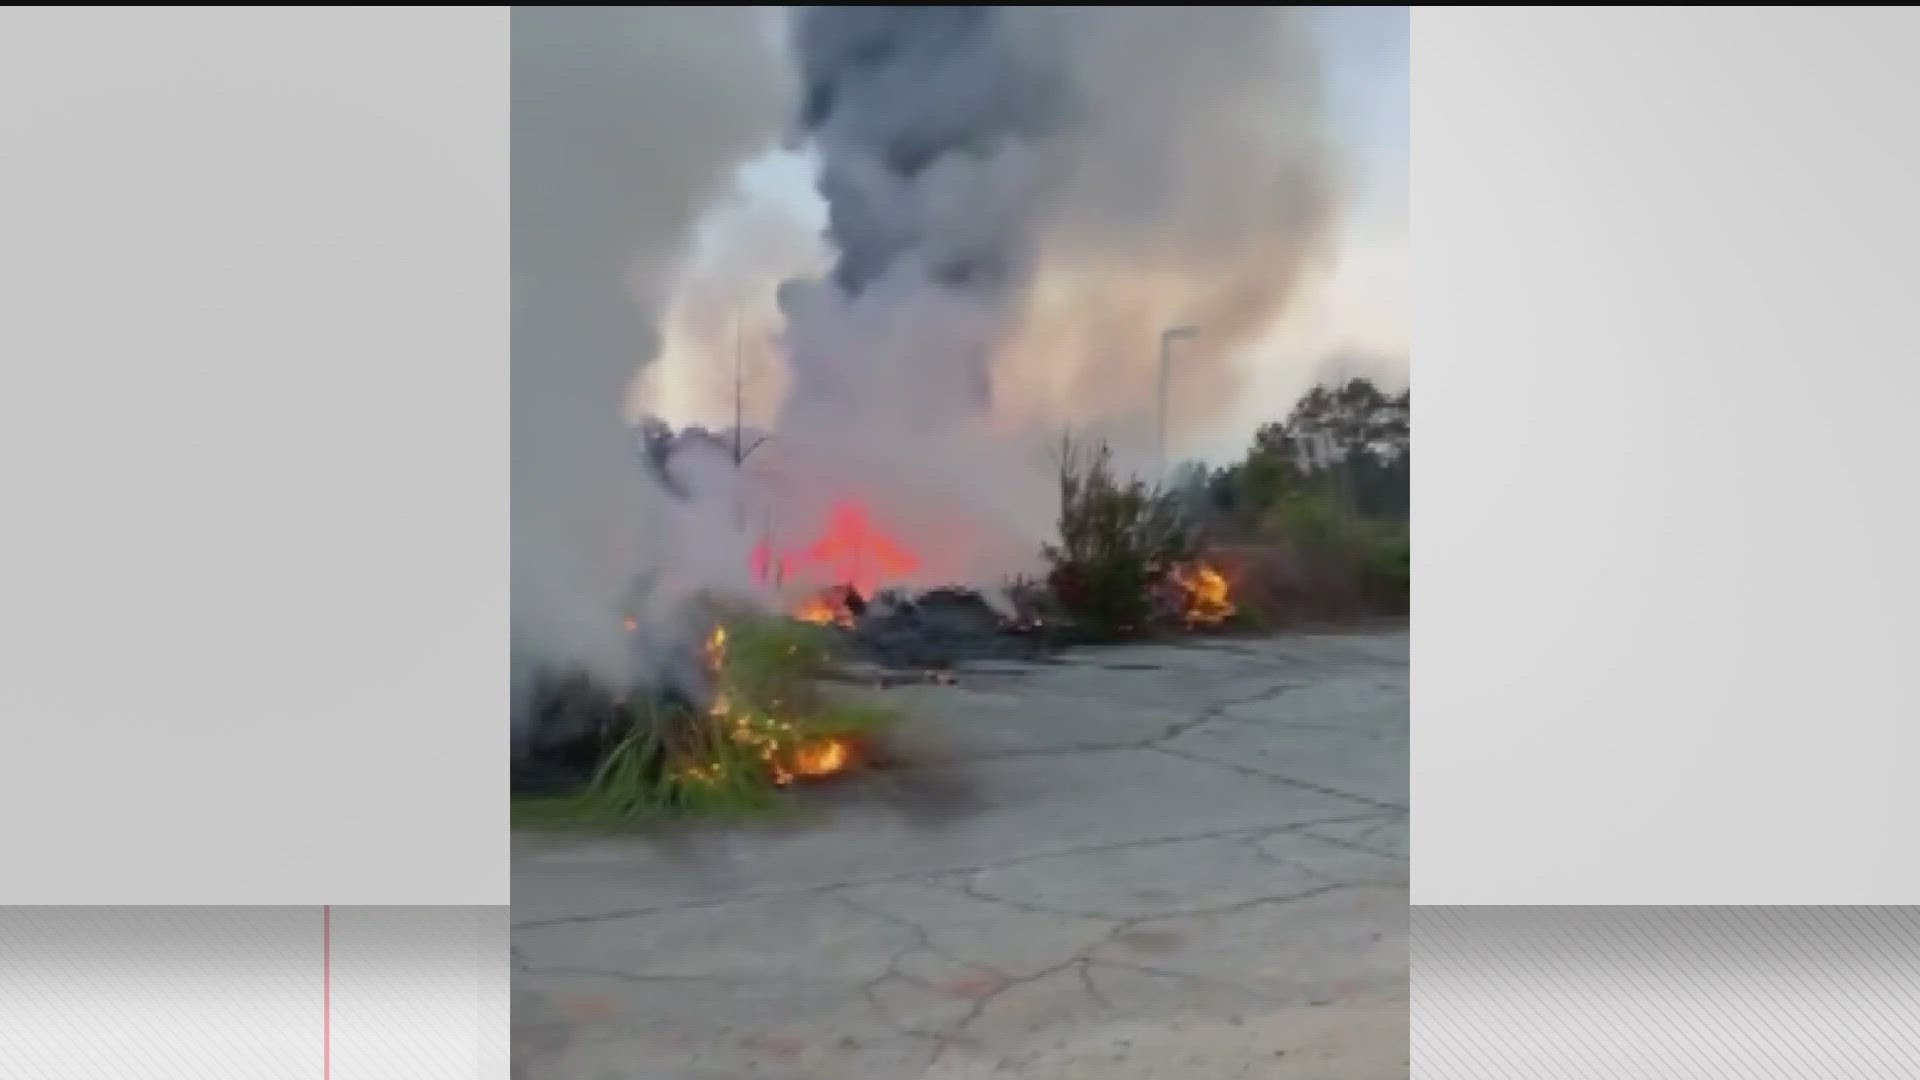 An 11Alive viewer sent in video of the scene that showed the fiery crash in the parking lot of the lake's island resort.